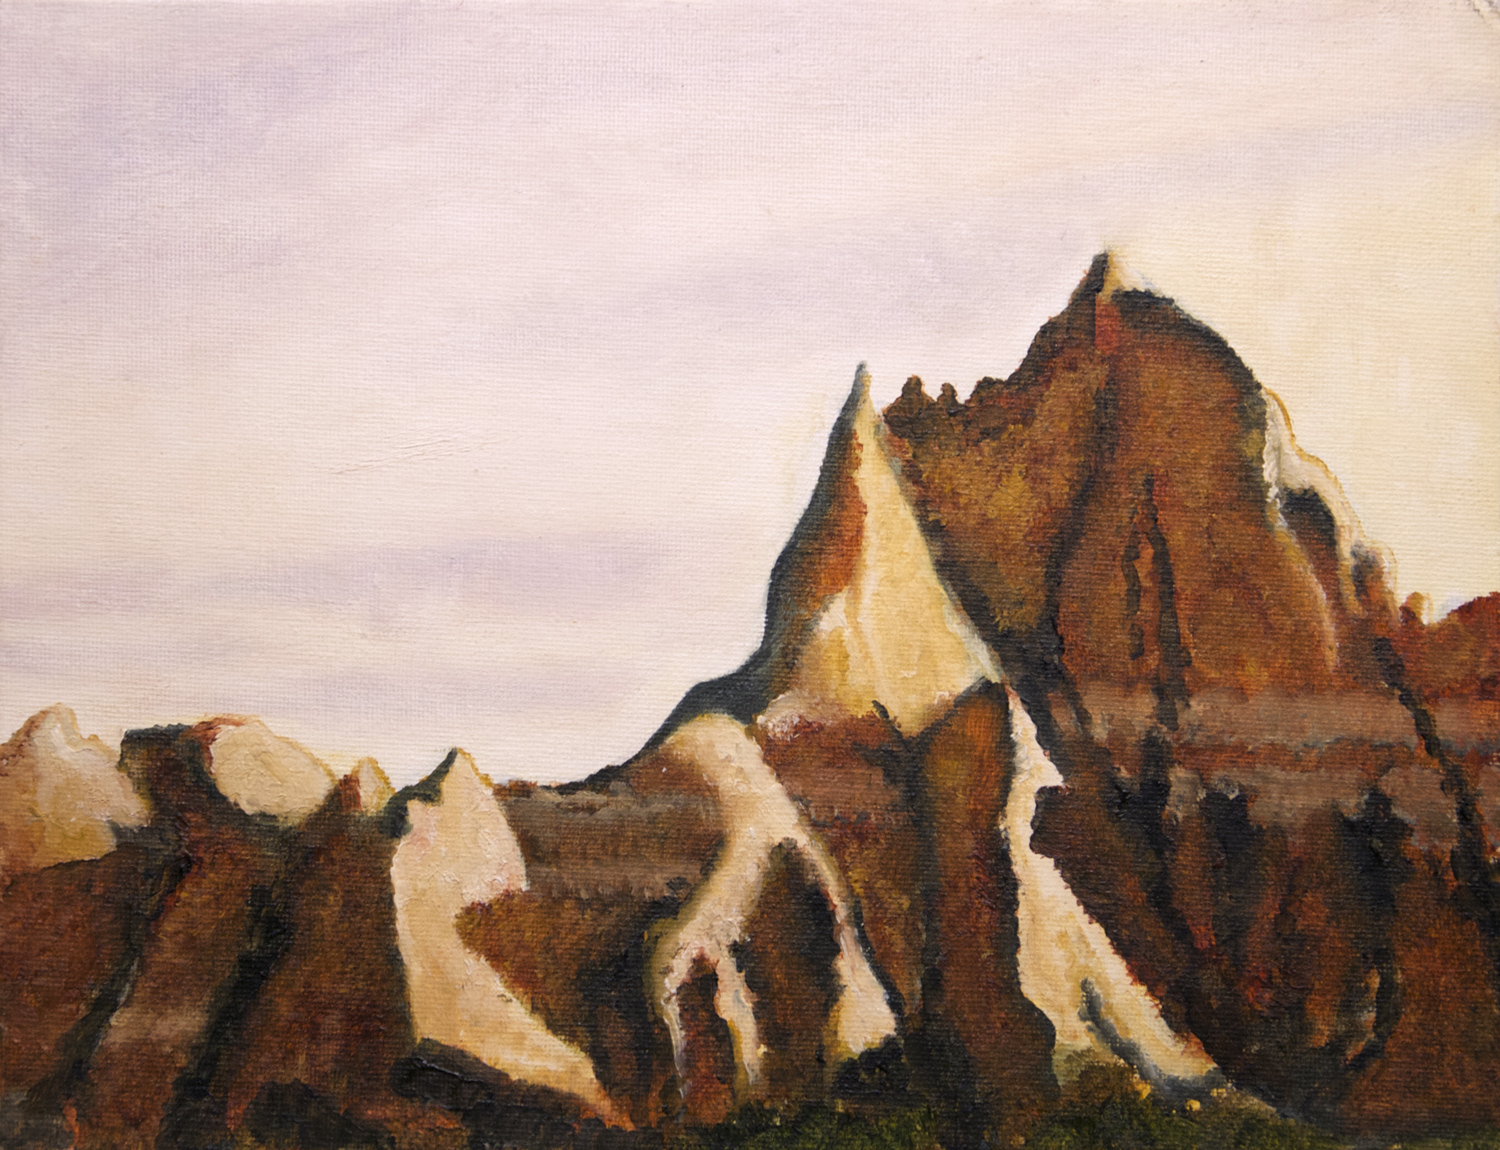 Badlands oil painting, by Billy Reiter